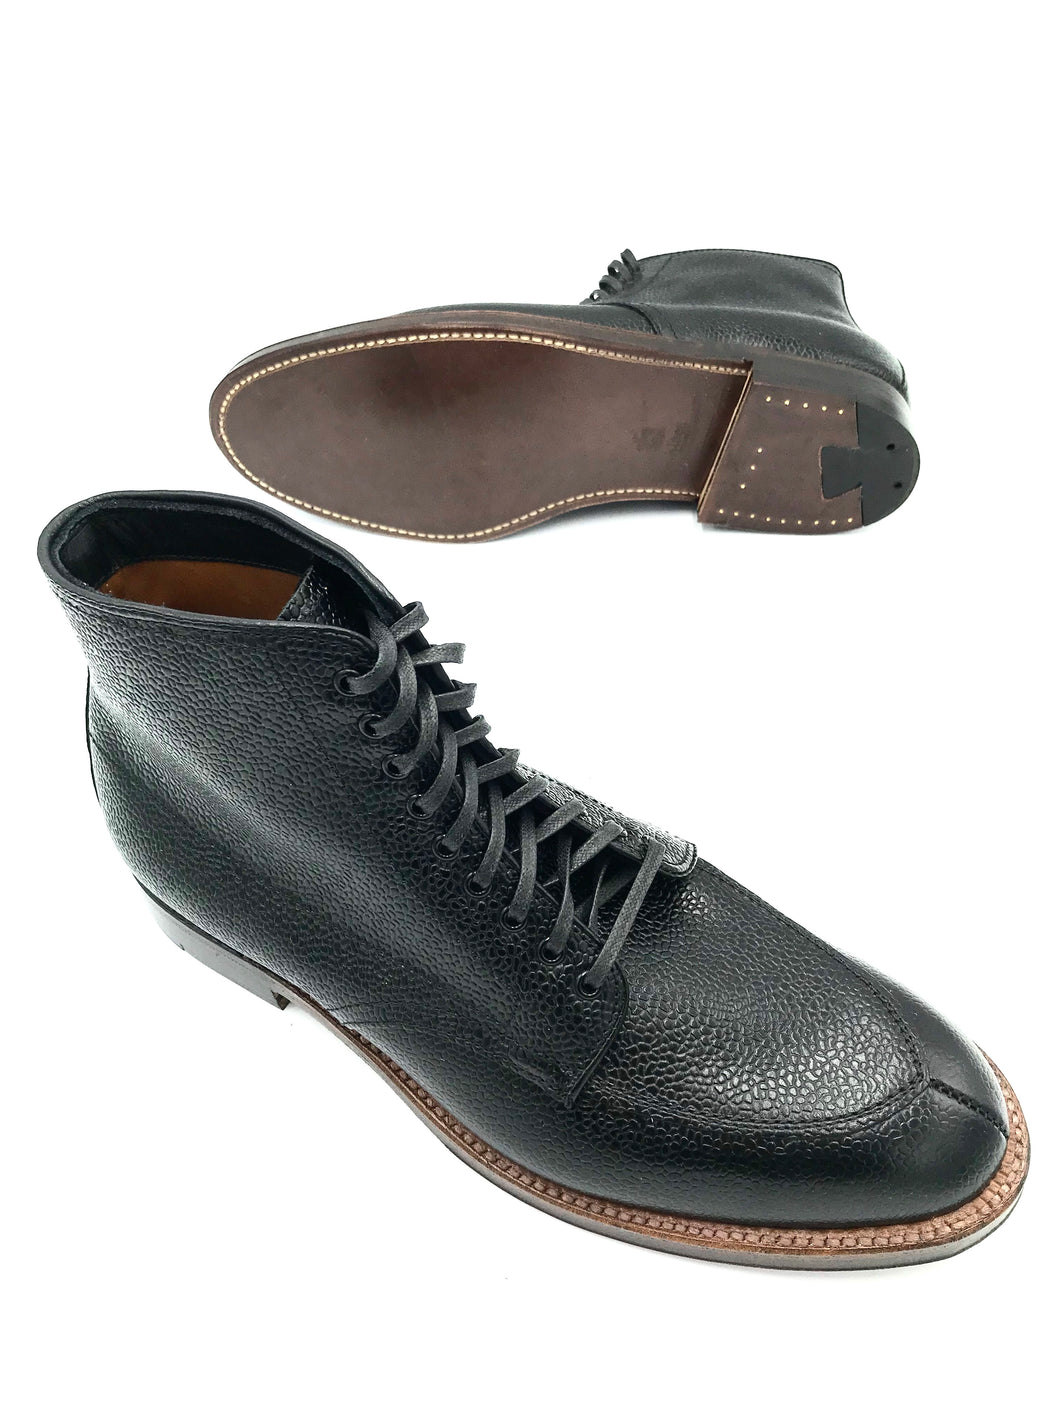 LaRossa and Alden special make up boot D9964.